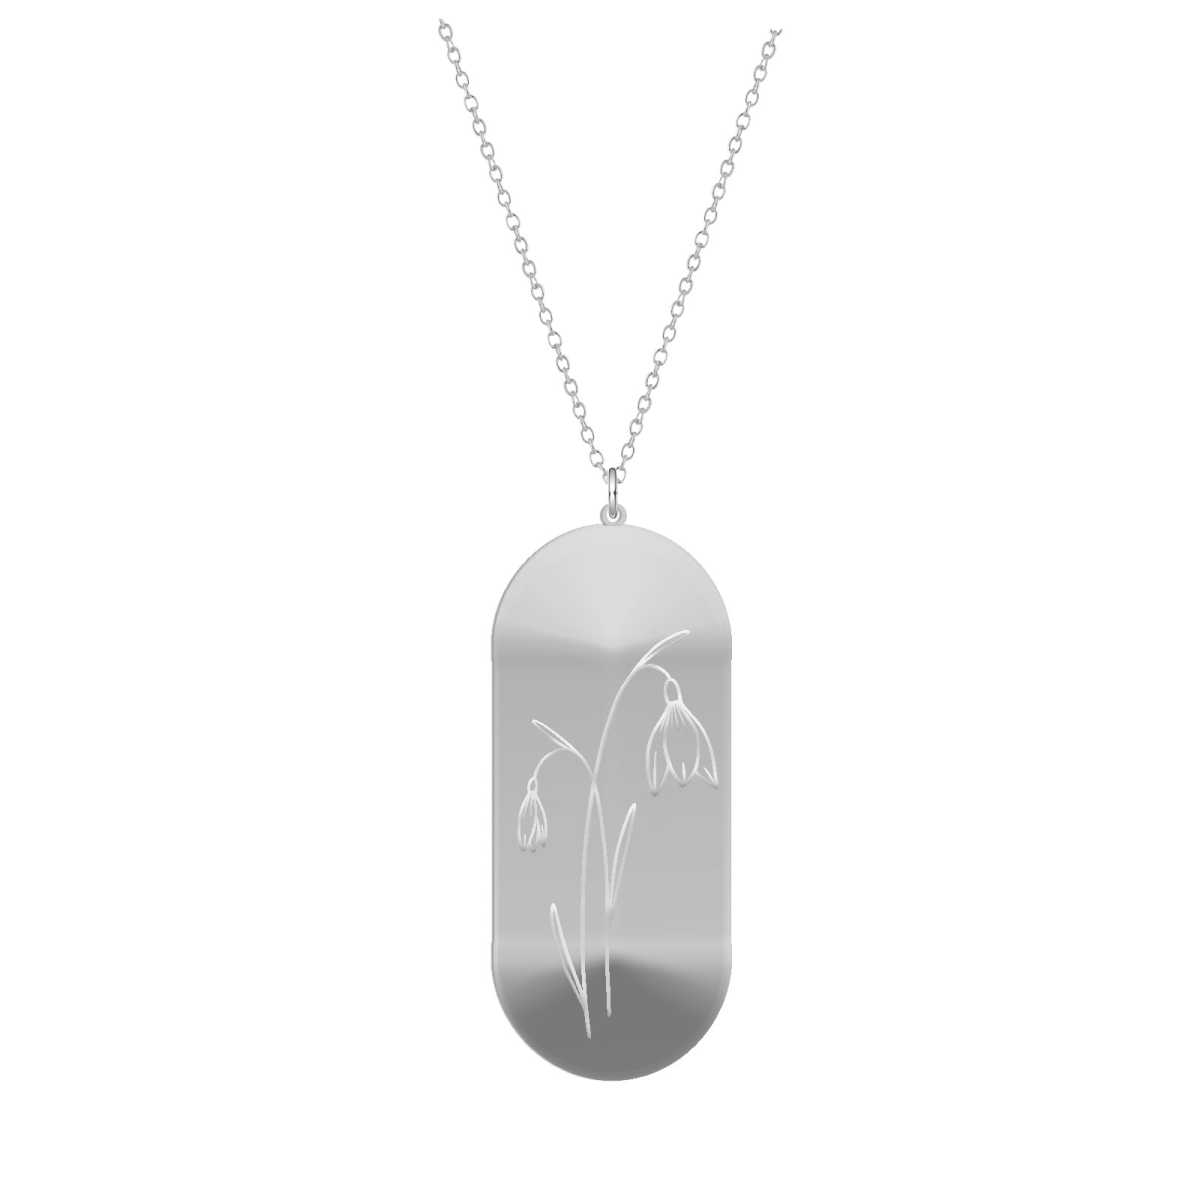 Birth Flower Necklace - | Mali's Canadian Jewelry Mali's 6 Metal Part: Sterling Silver - Birth Flower Necklace - Engraved Silver